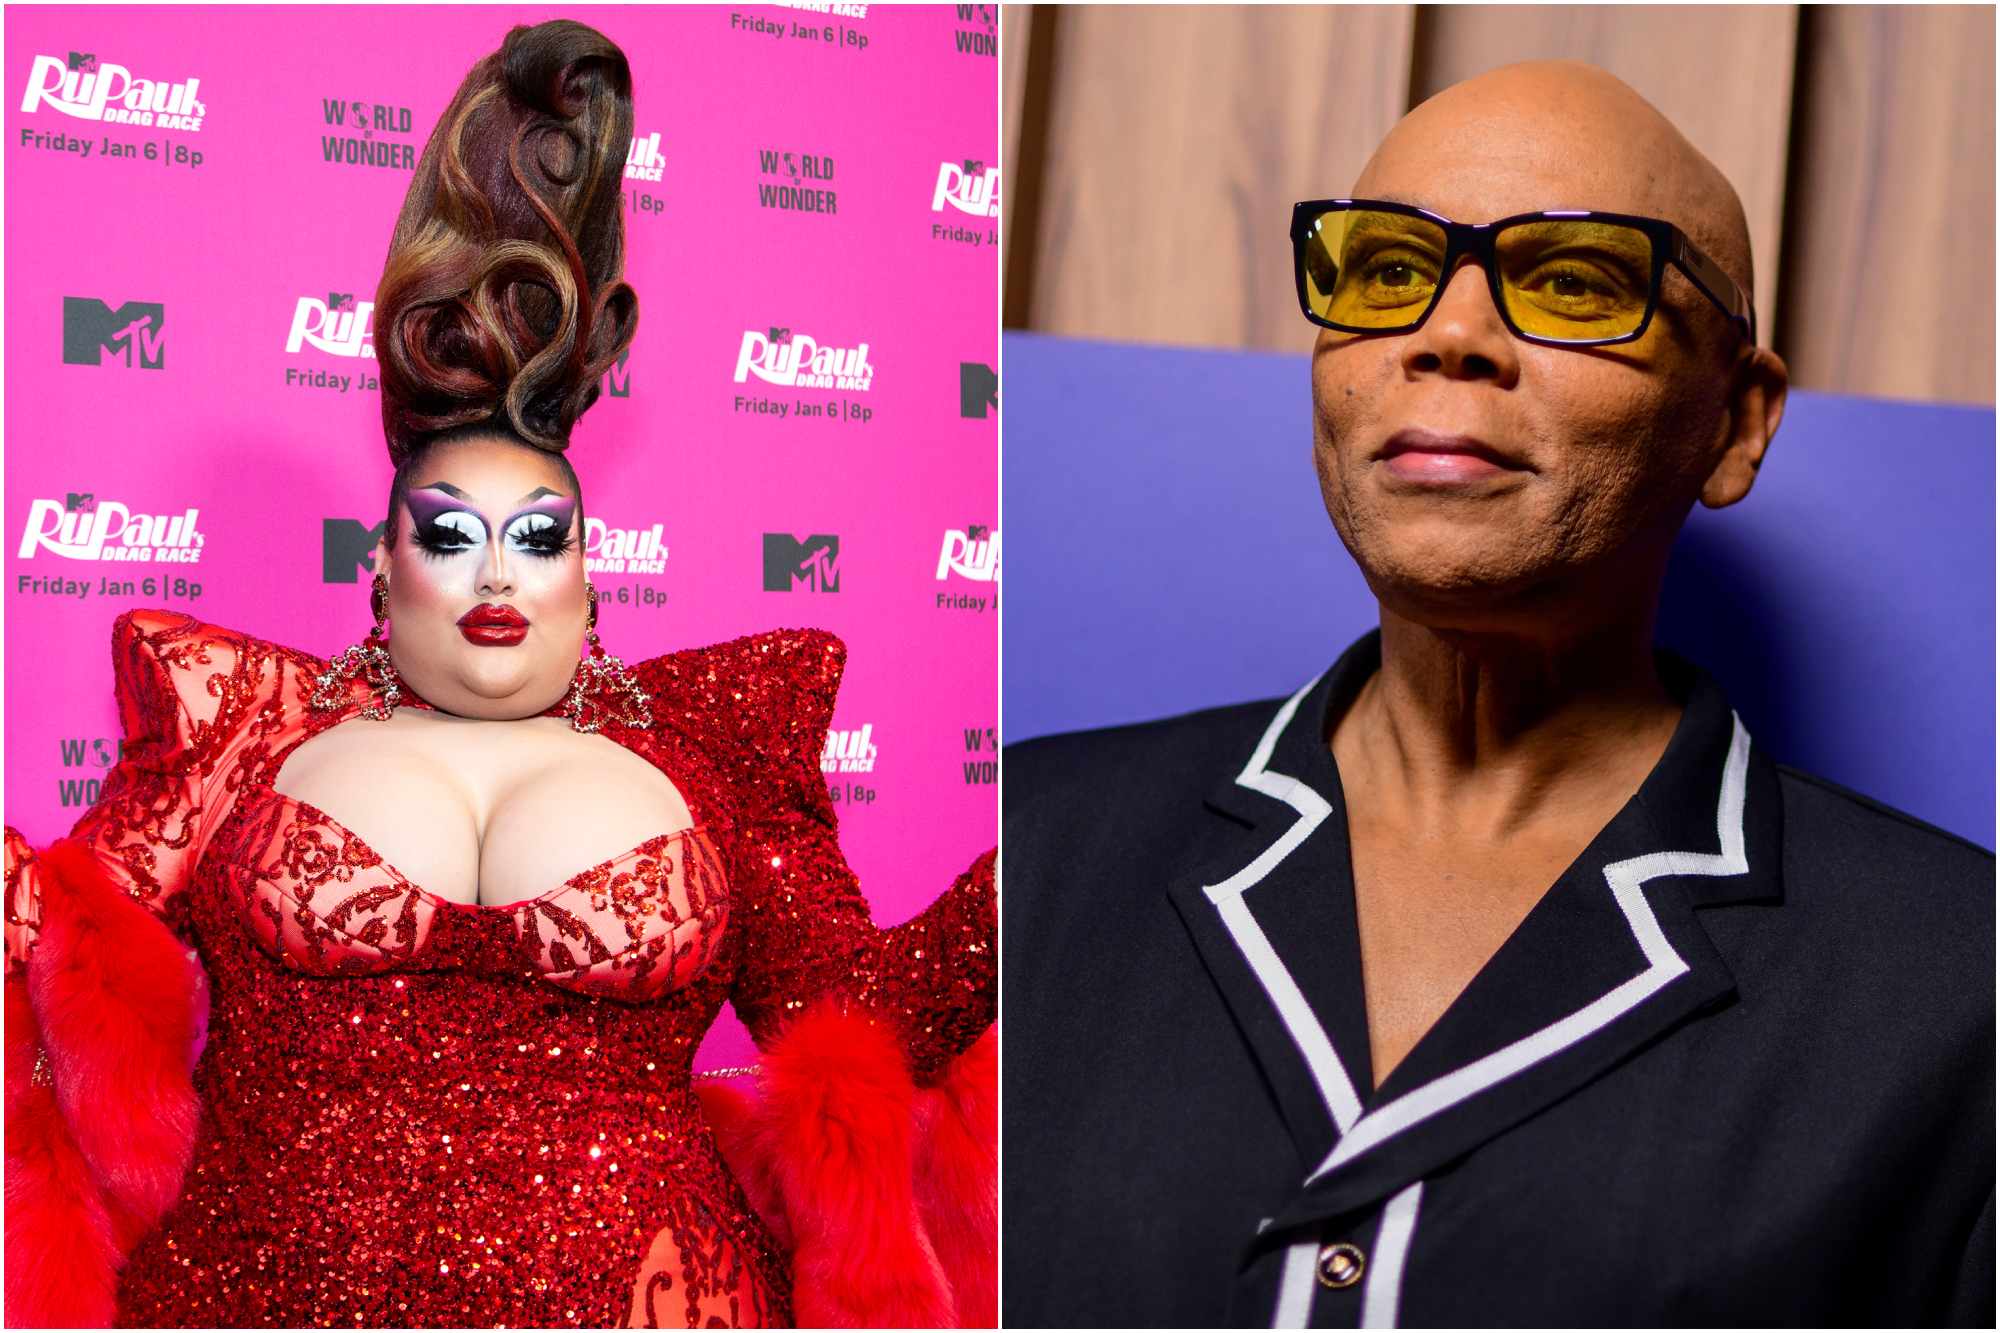 'RuPaul's Drag Race' Mistress Isabelle Brooks and book author RuPaul. Mistress is on the left wearing a red gown in front of a pink step and repeat. RuPaul is wearing a collared shirt, looking ahead, while wearing glasses.